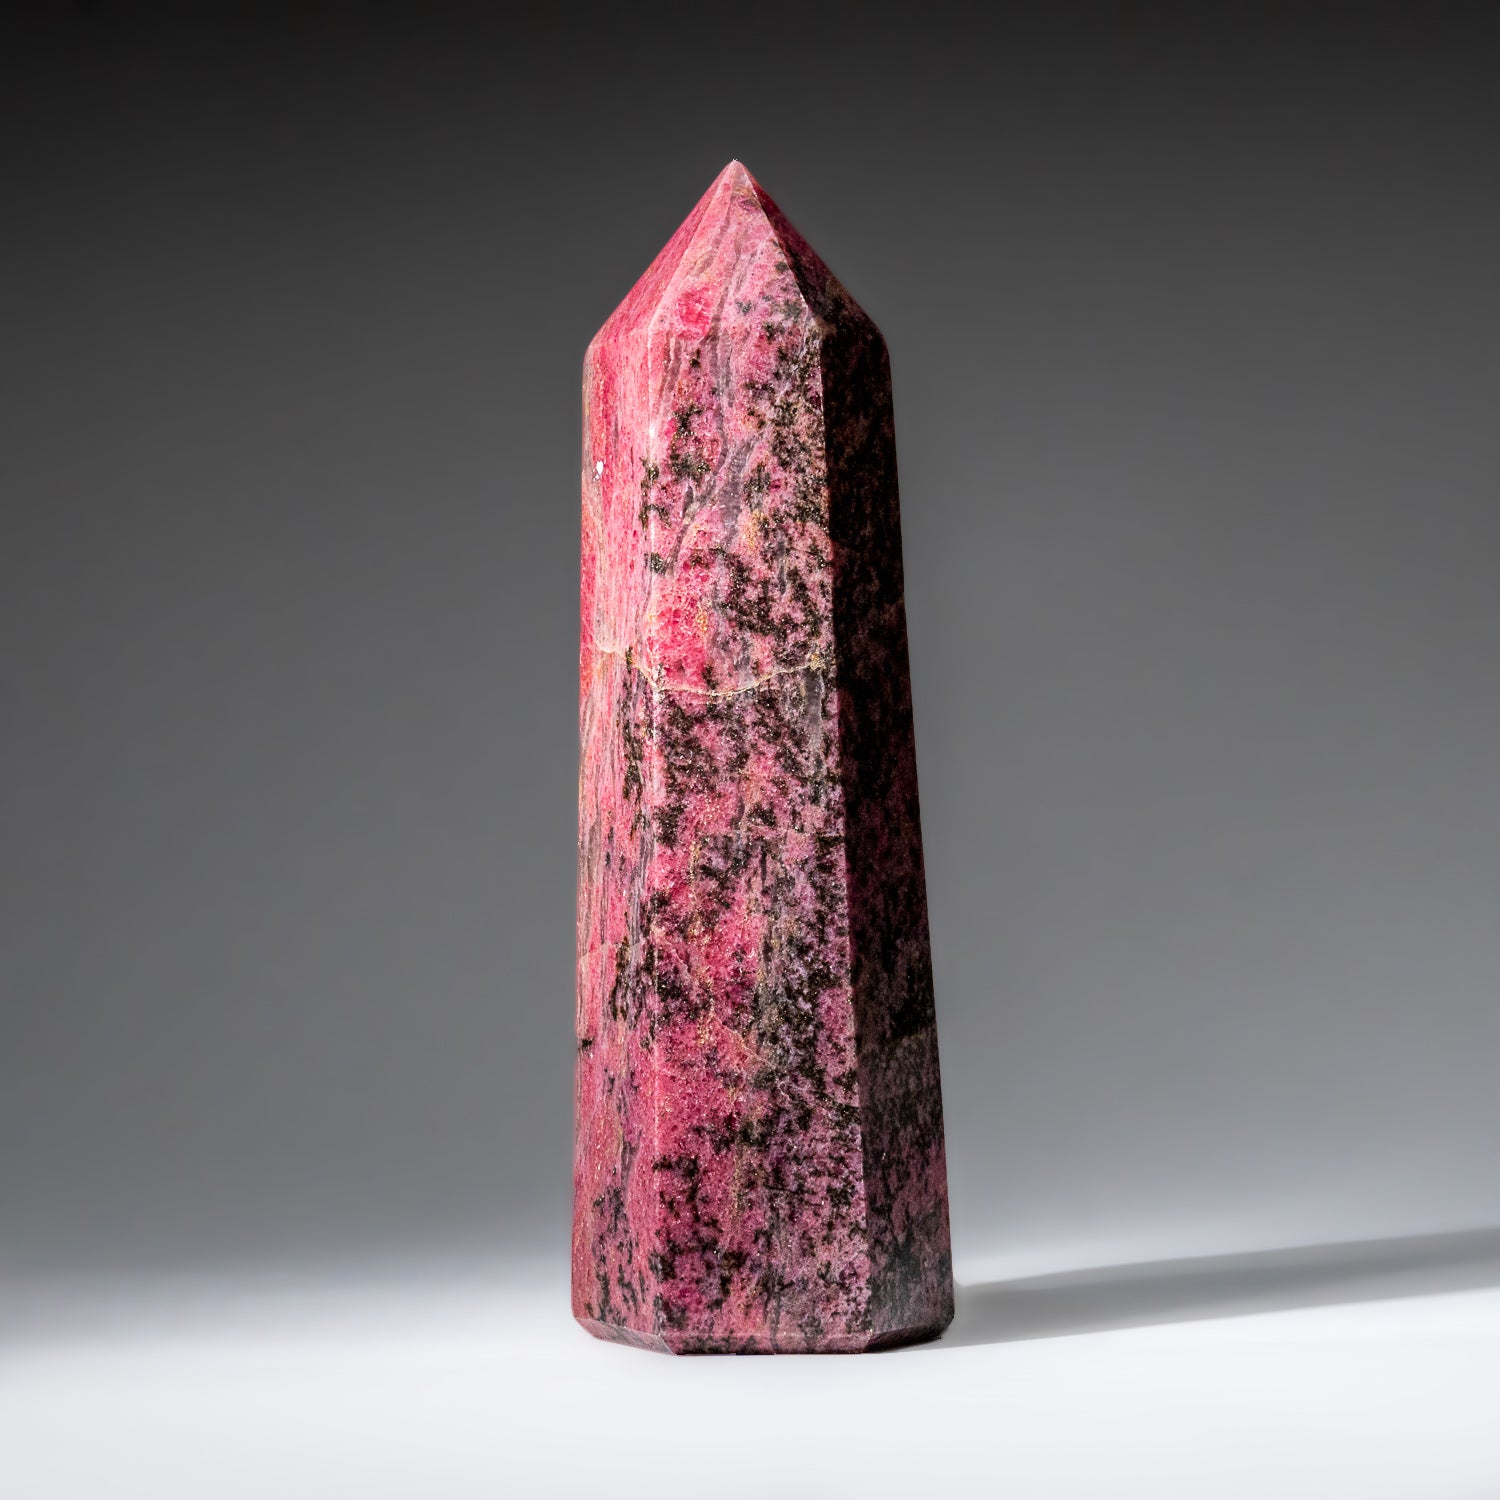 Genuine Polished Imperial Rhodonite Point from Madagascar (3.6 lbs)